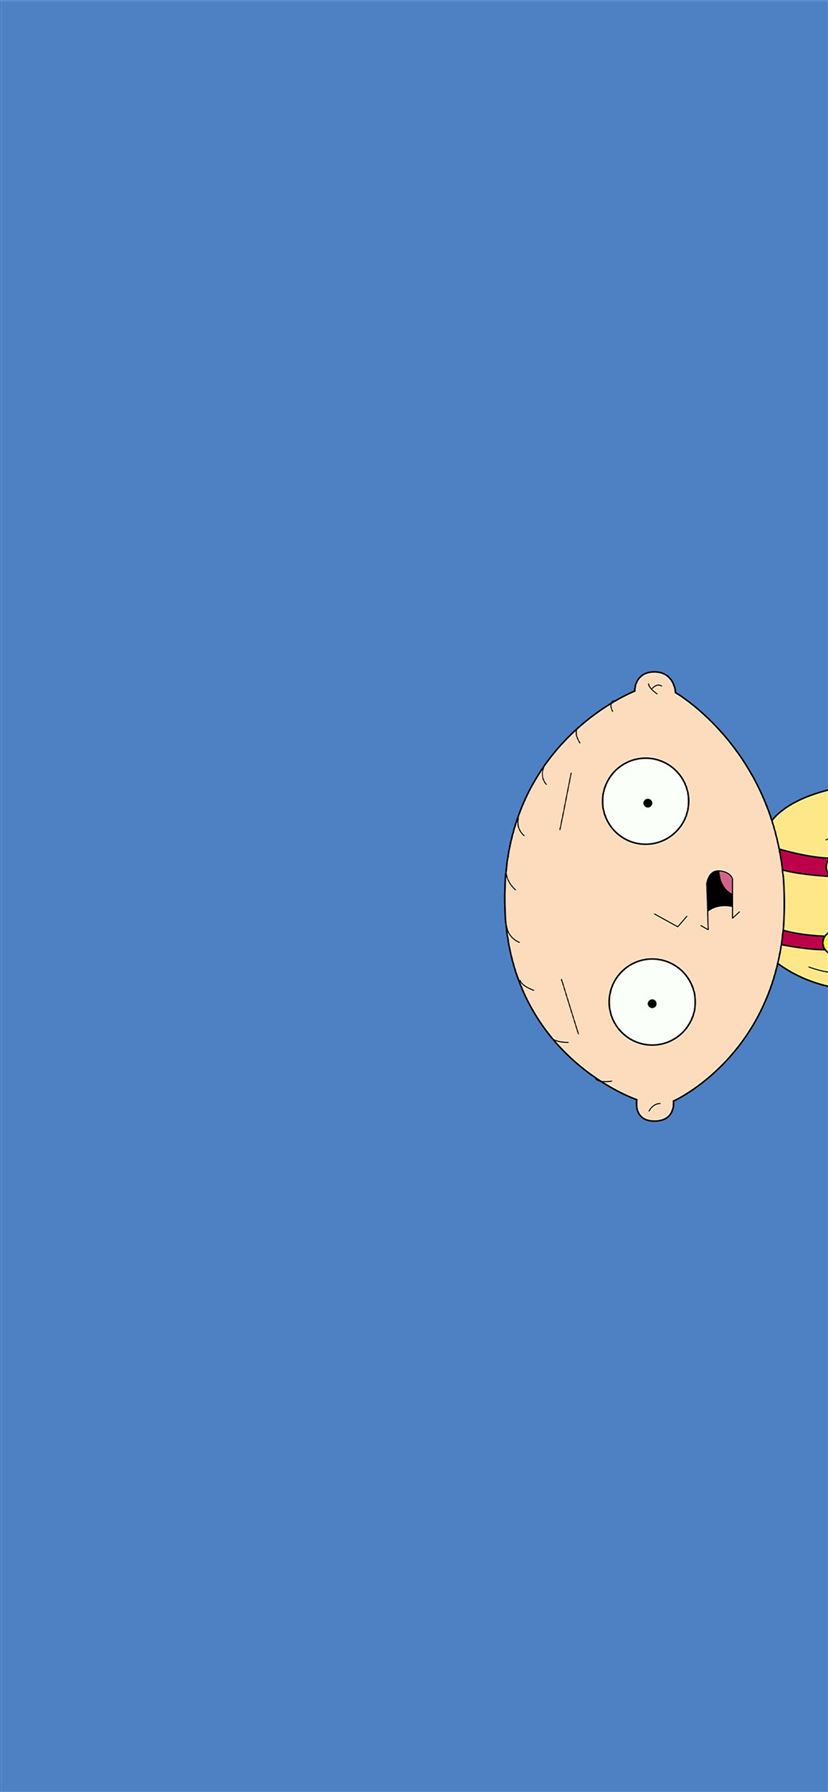 Wallpaper ID 724463  Stewie Griffin griffin copy space Family Guy  speech bubble sky emotion text symbol 720P human face men white  background people adult smiling free download